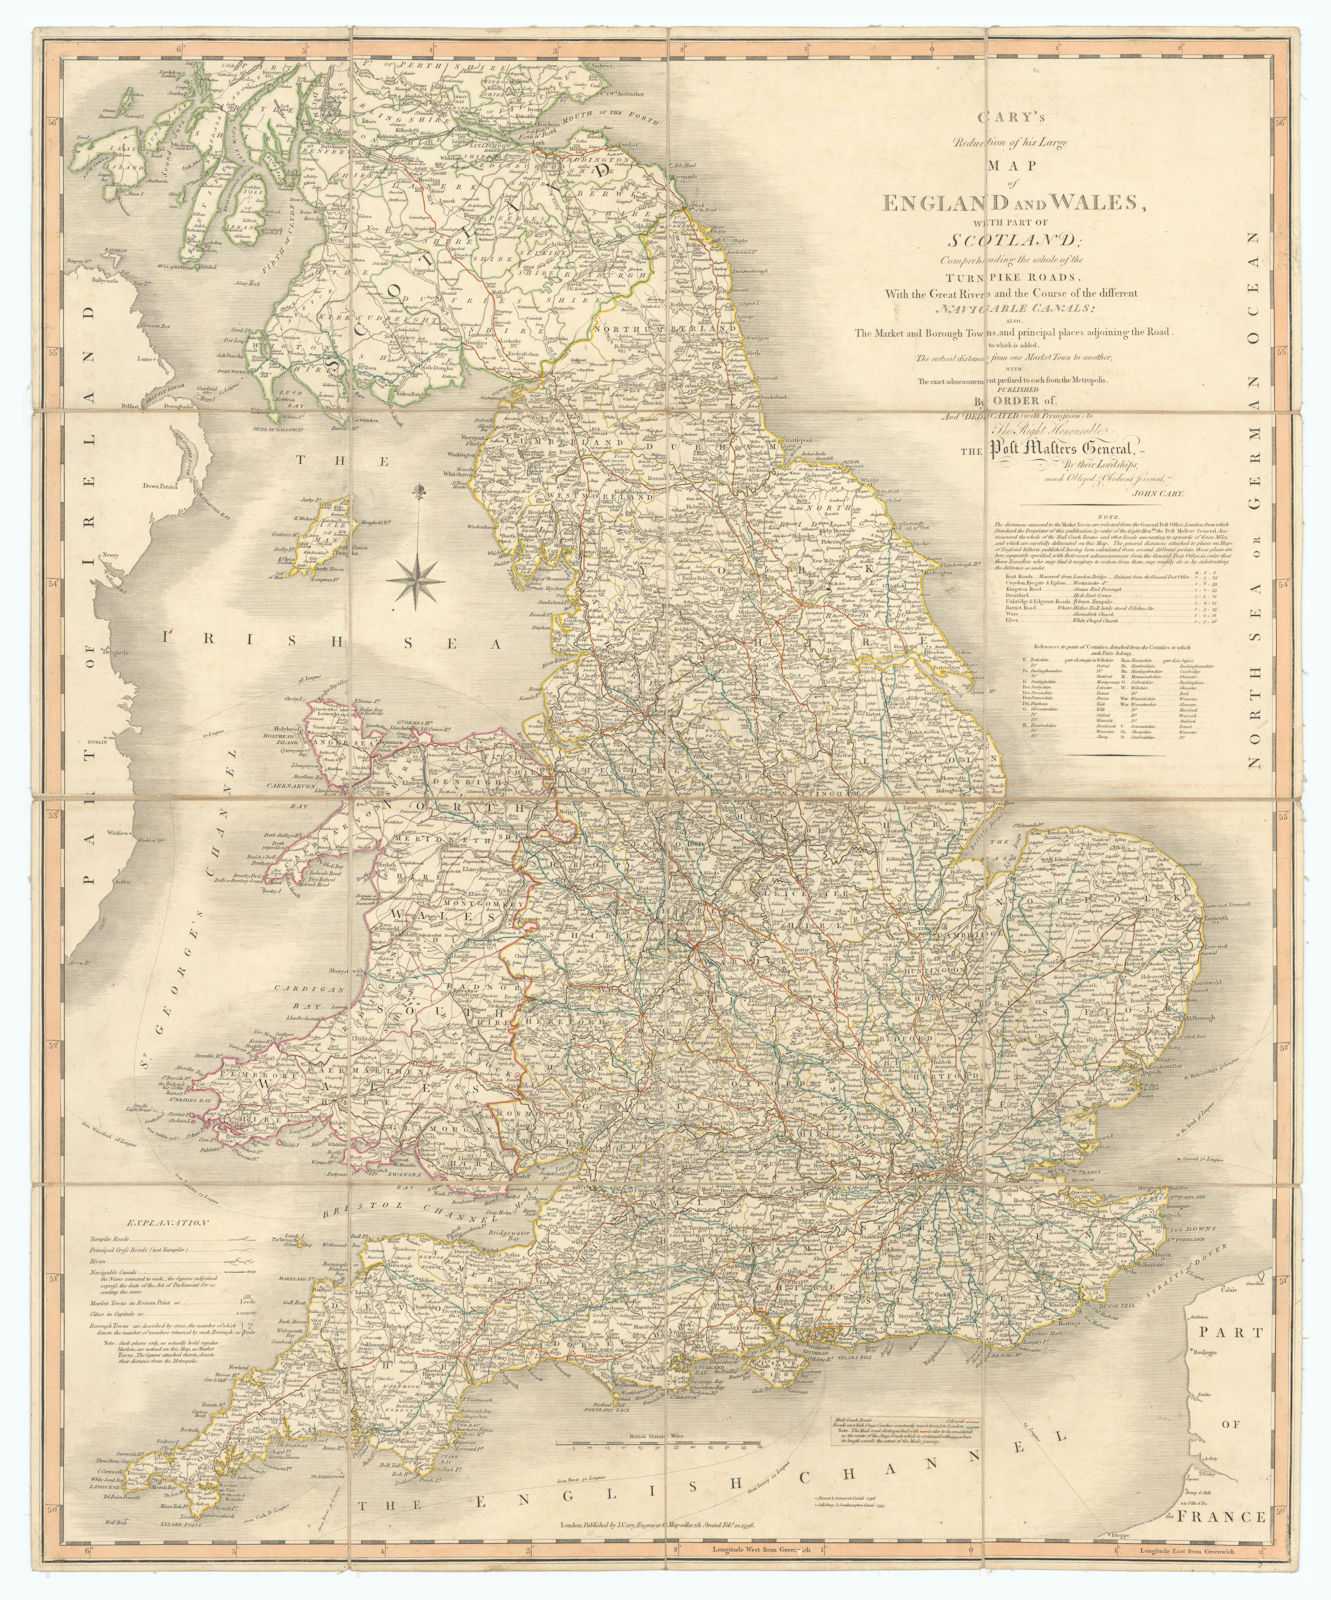 Associate Product 'Cary's reduction of his large map of England & Wales'. Turnpikes canals &c 1796